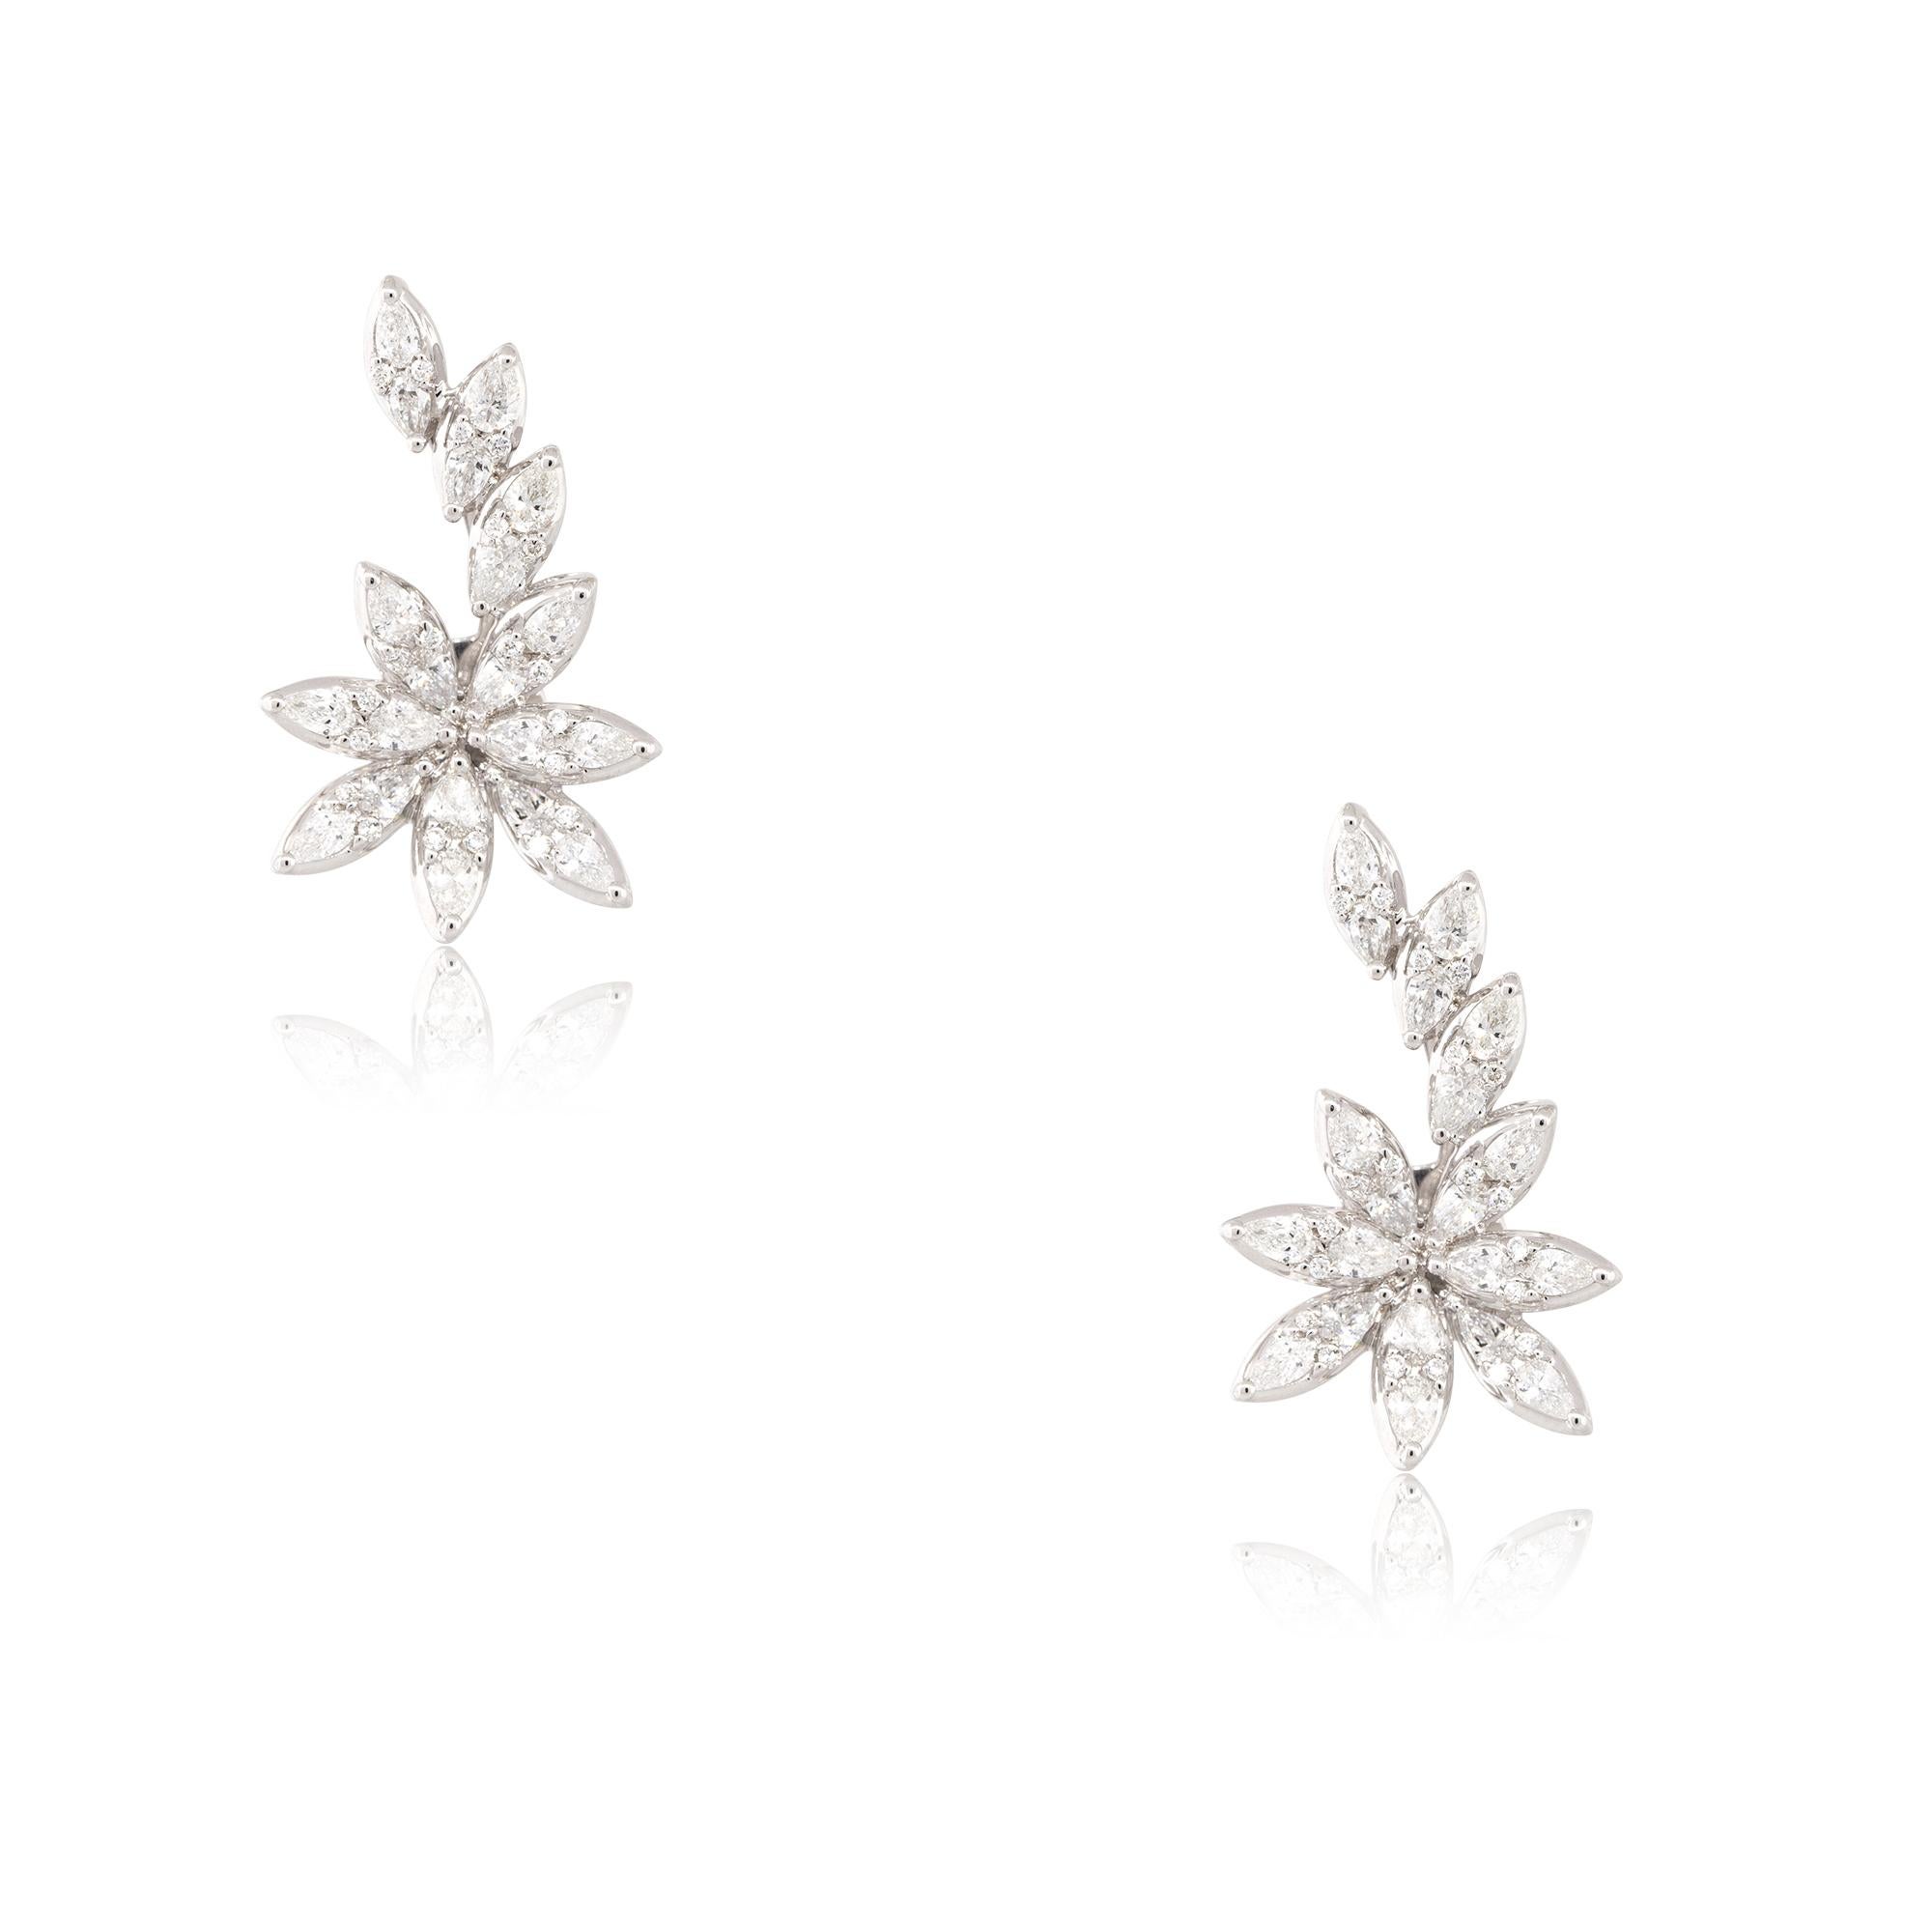 18k White Gold 2.14ctw Diamond Flower Crawler Earrings
Material: 18k White Gold
Diamond Details: Approximately 2.14ctw of Pear Shaped and Round cut Diamonds
Earring Backs: Elongated Friction Backs 
Item Dimensions: 16.9mm x 5.15mm x 27.8mm
Item